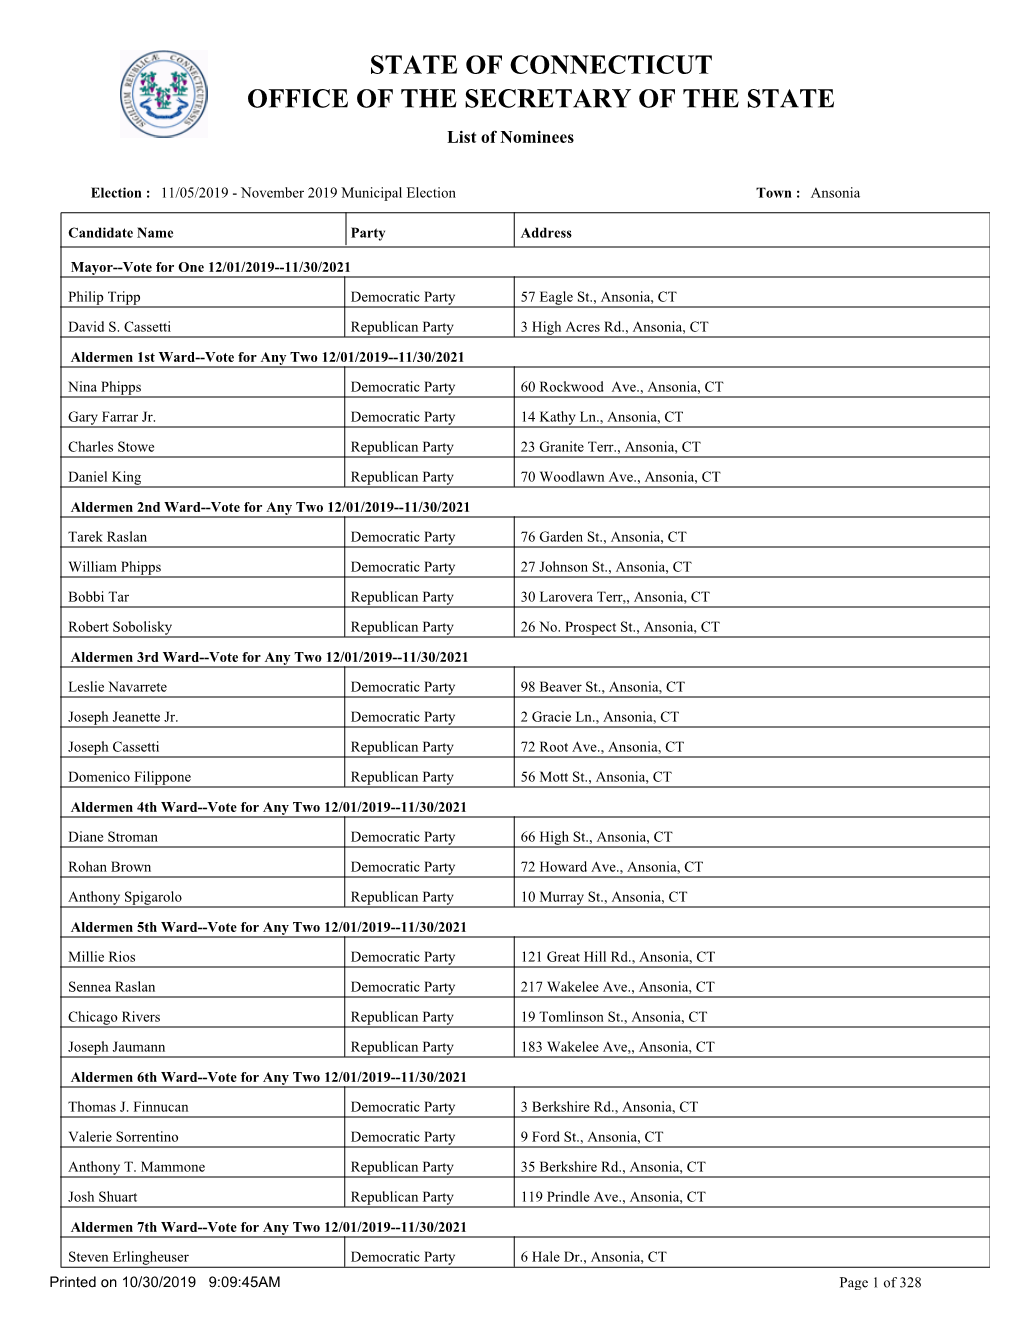 STATE of CONNECTICUT OFFICE of the SECRETARY of the STATE List of Nominees